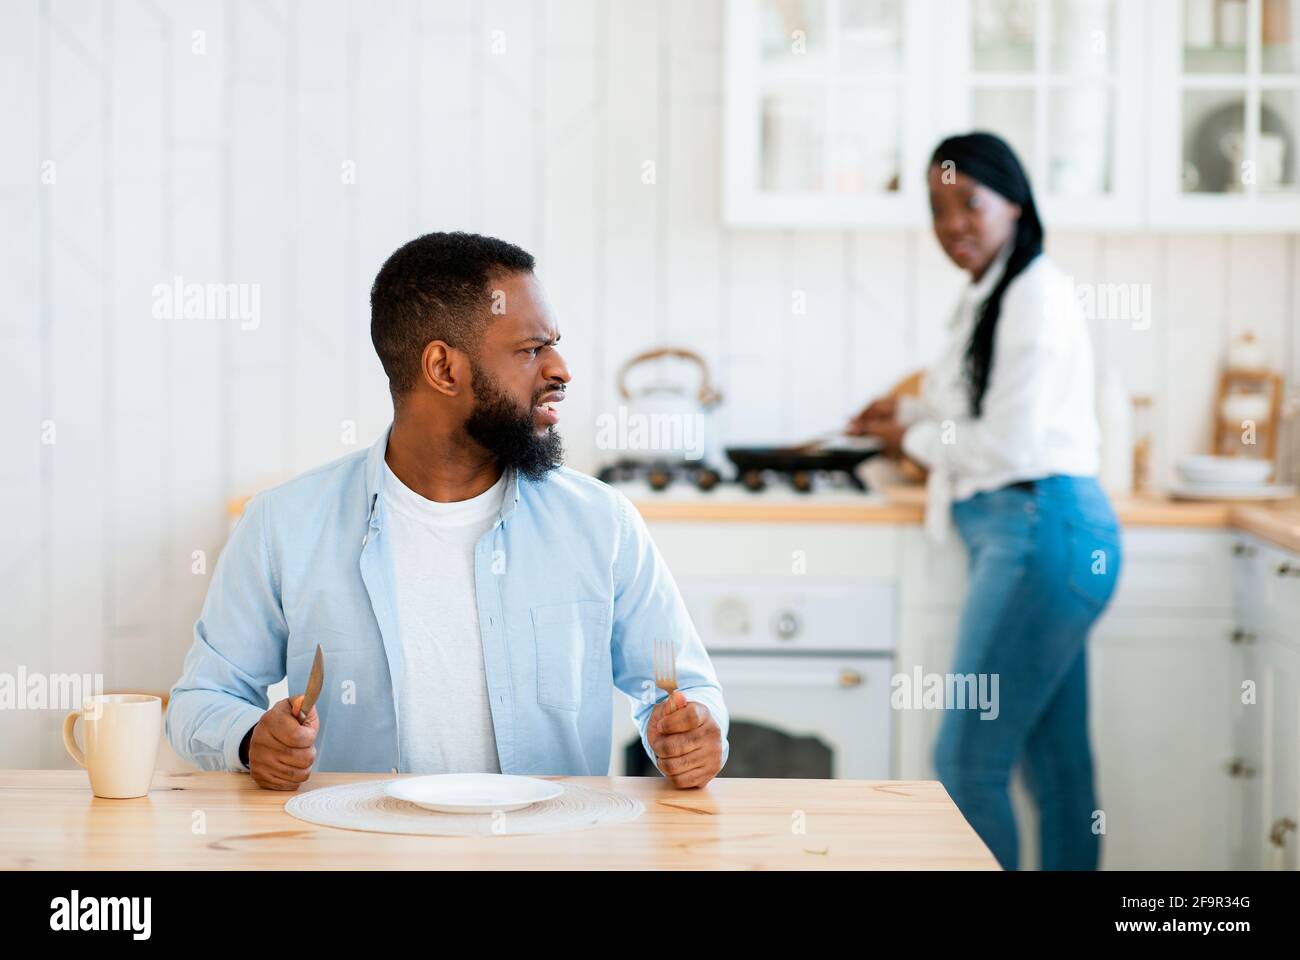 Impatient Hungry Black Husband Waiting For Food, Sitting At Table In Kitchen Stock Photo